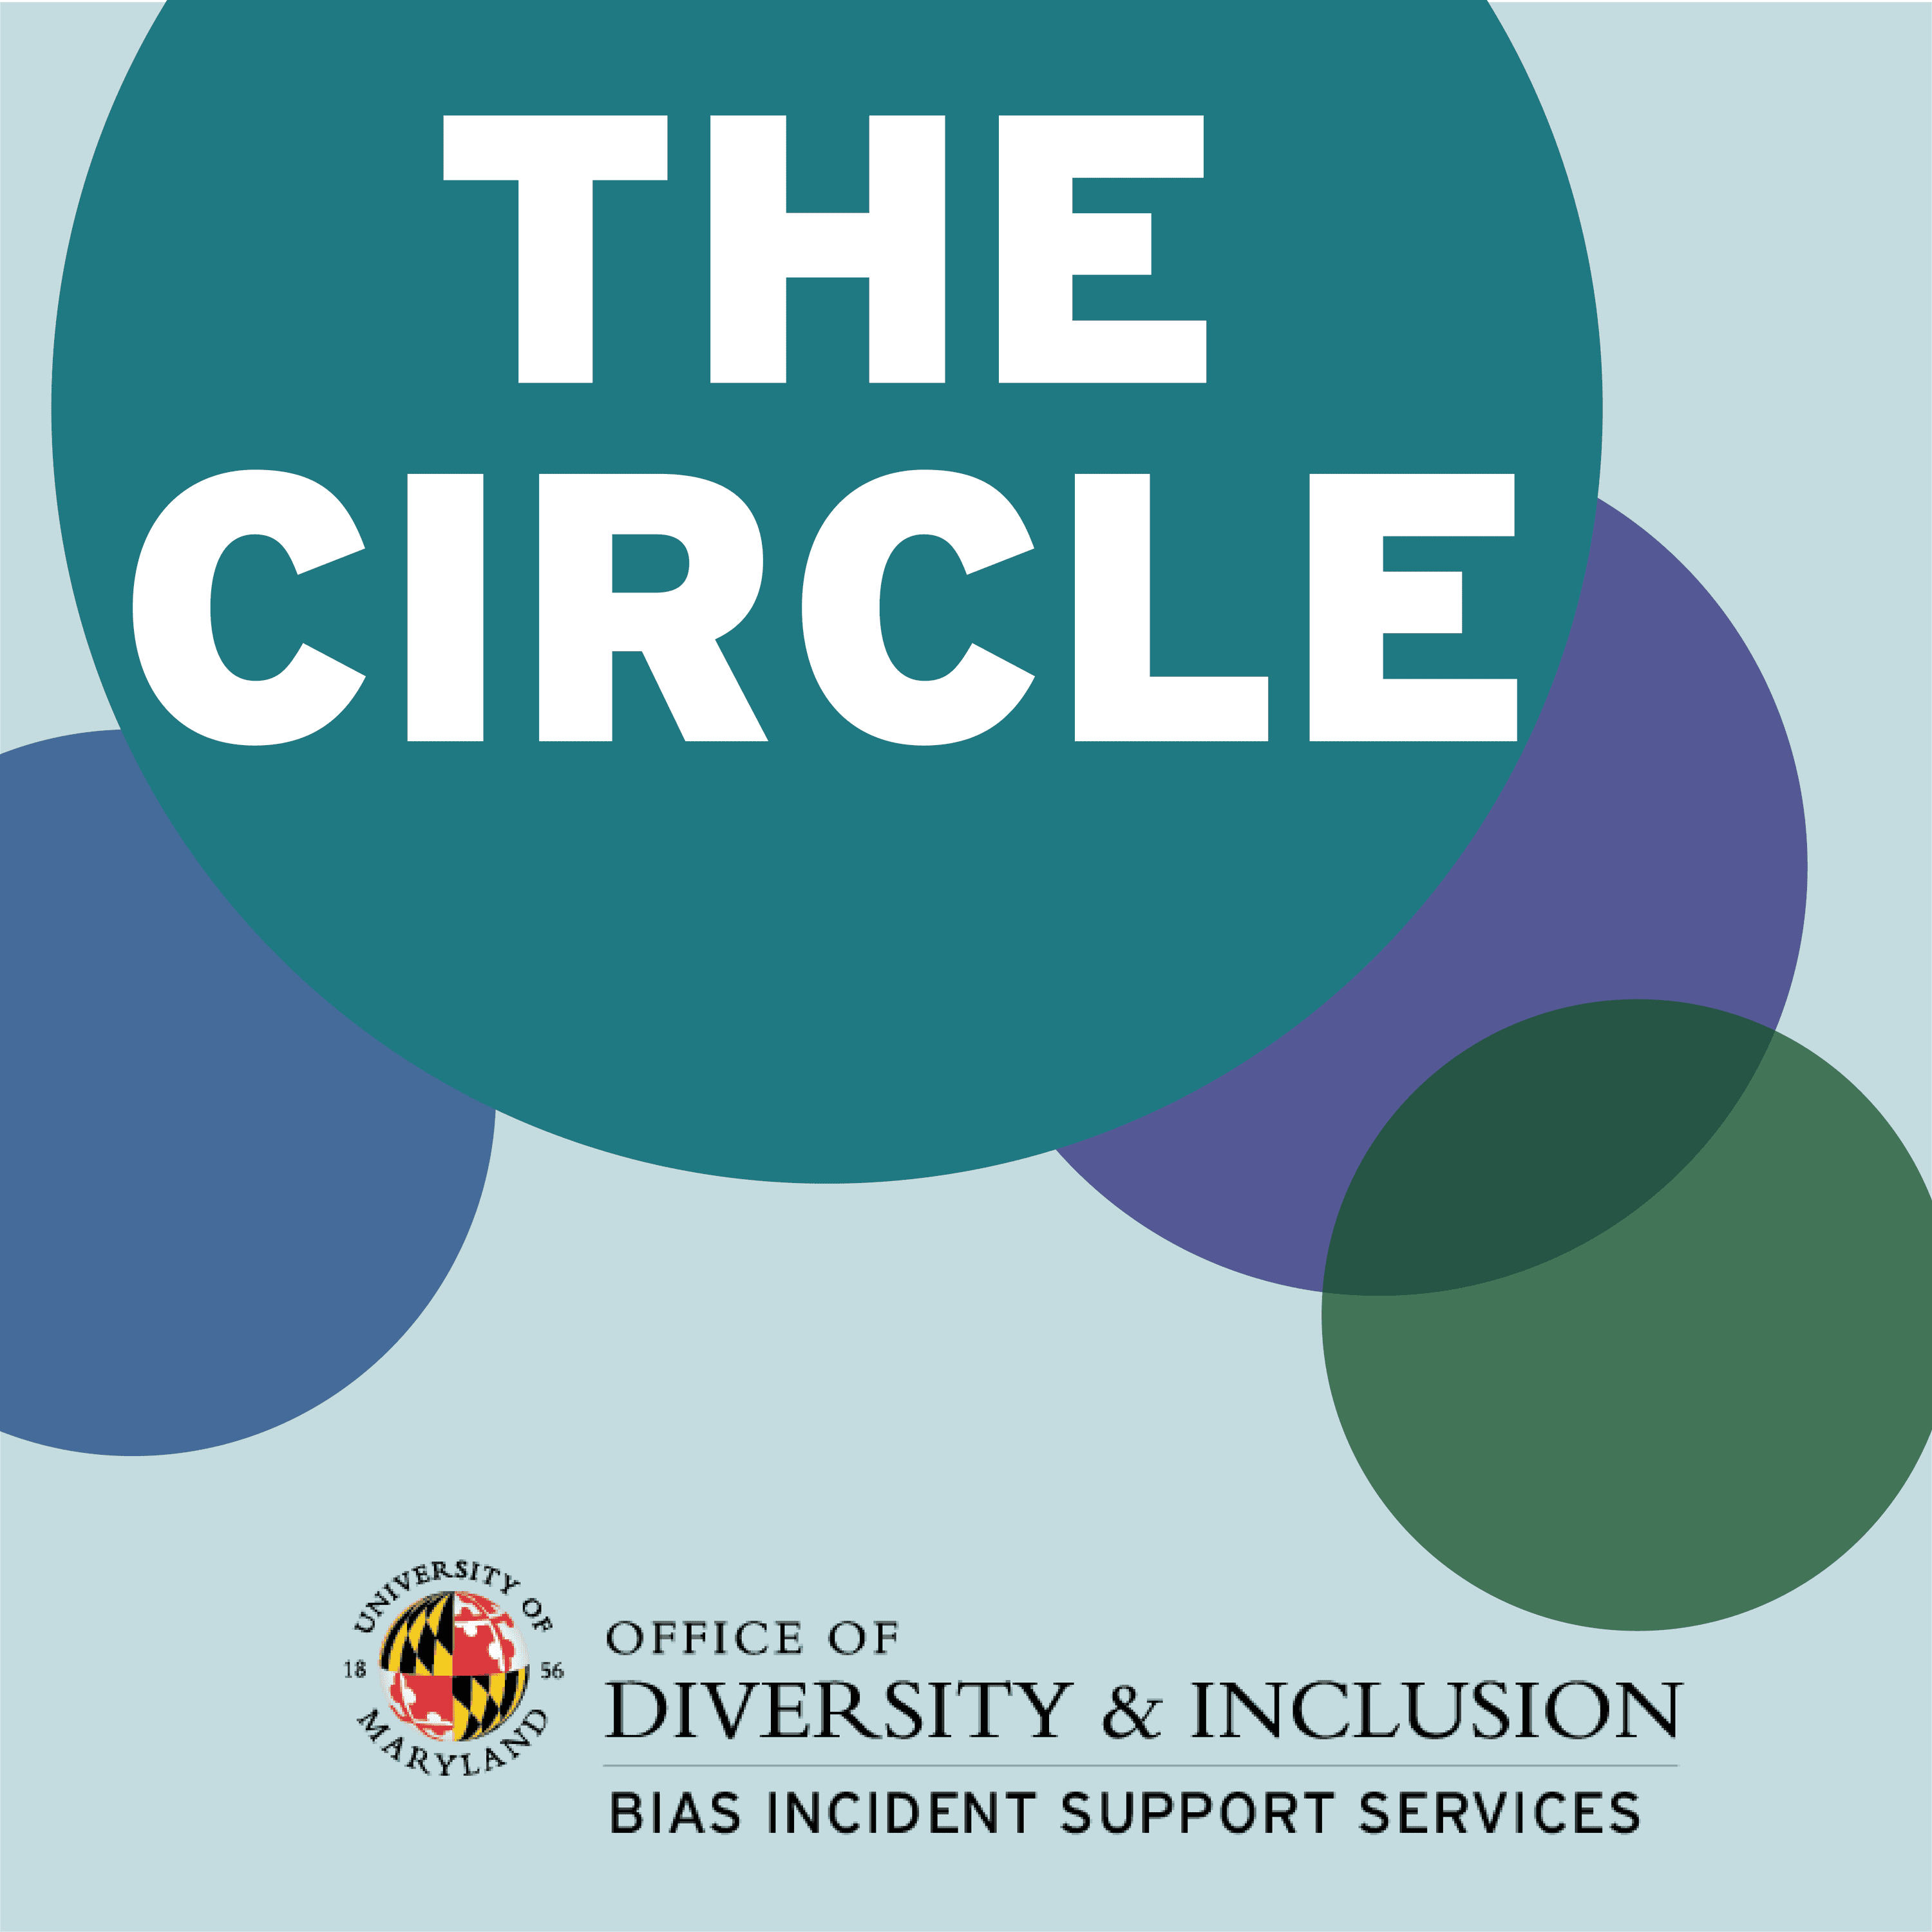 Flyer for The Circle with an overlapping circle design